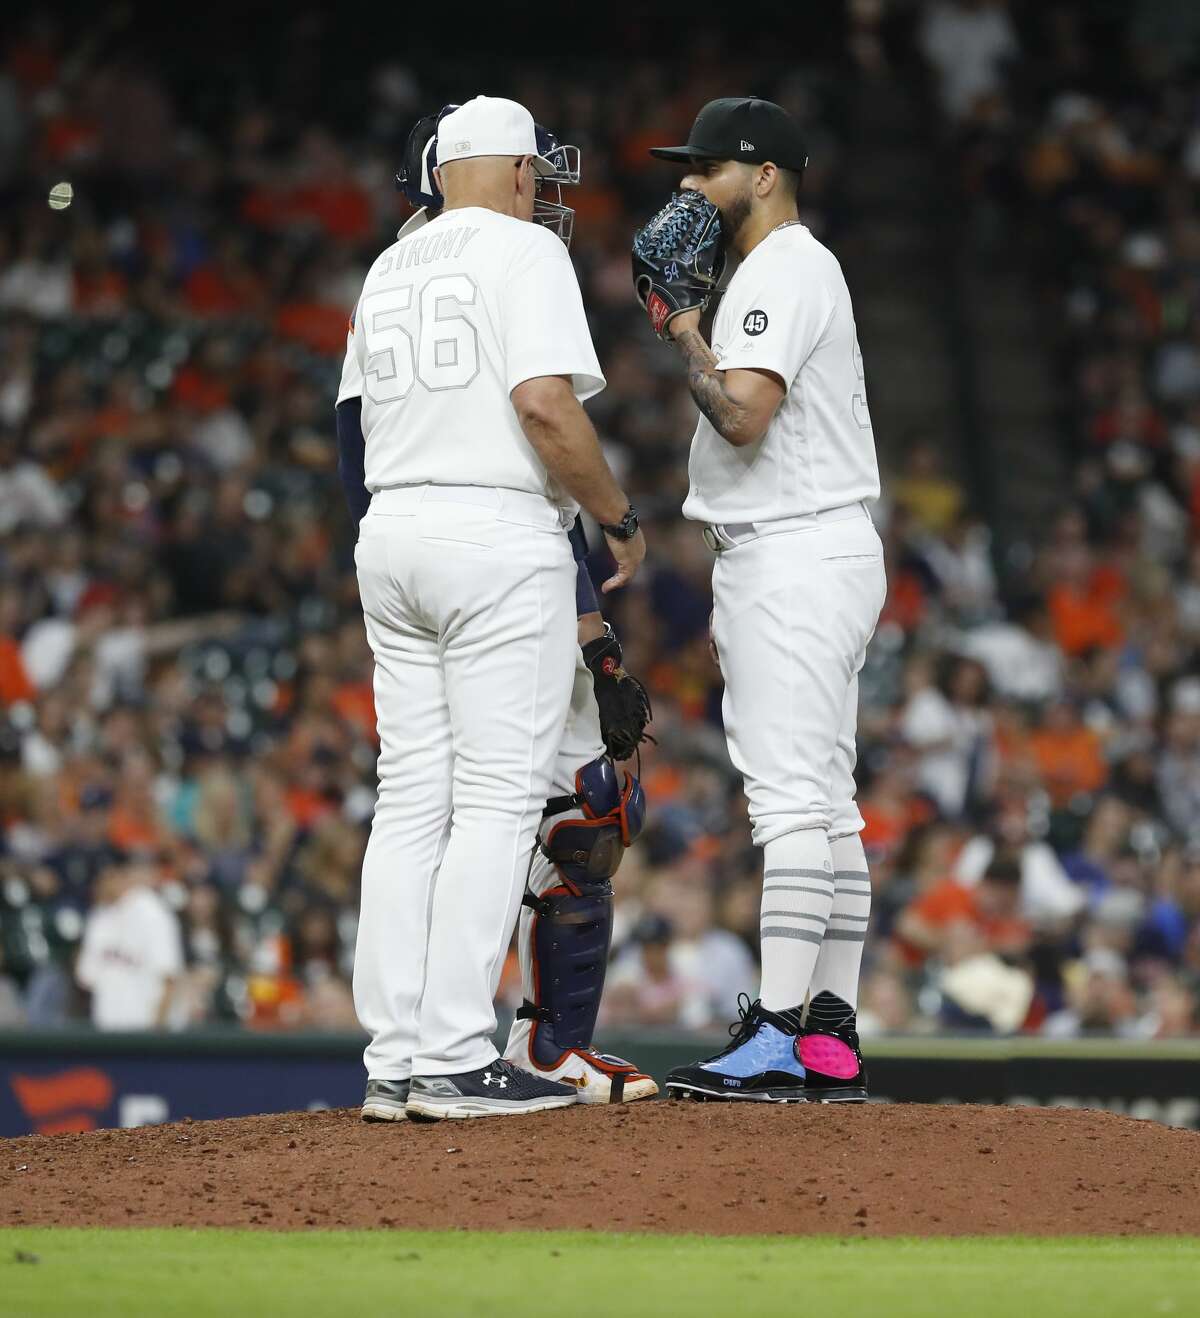 Houston Astros relief pitcher Roberto Osuna (54) talks with pitching coach Brent Strom (56) during the ninth inning of an MLB game at Minute Maid Park, Friday, August 23, 2019.